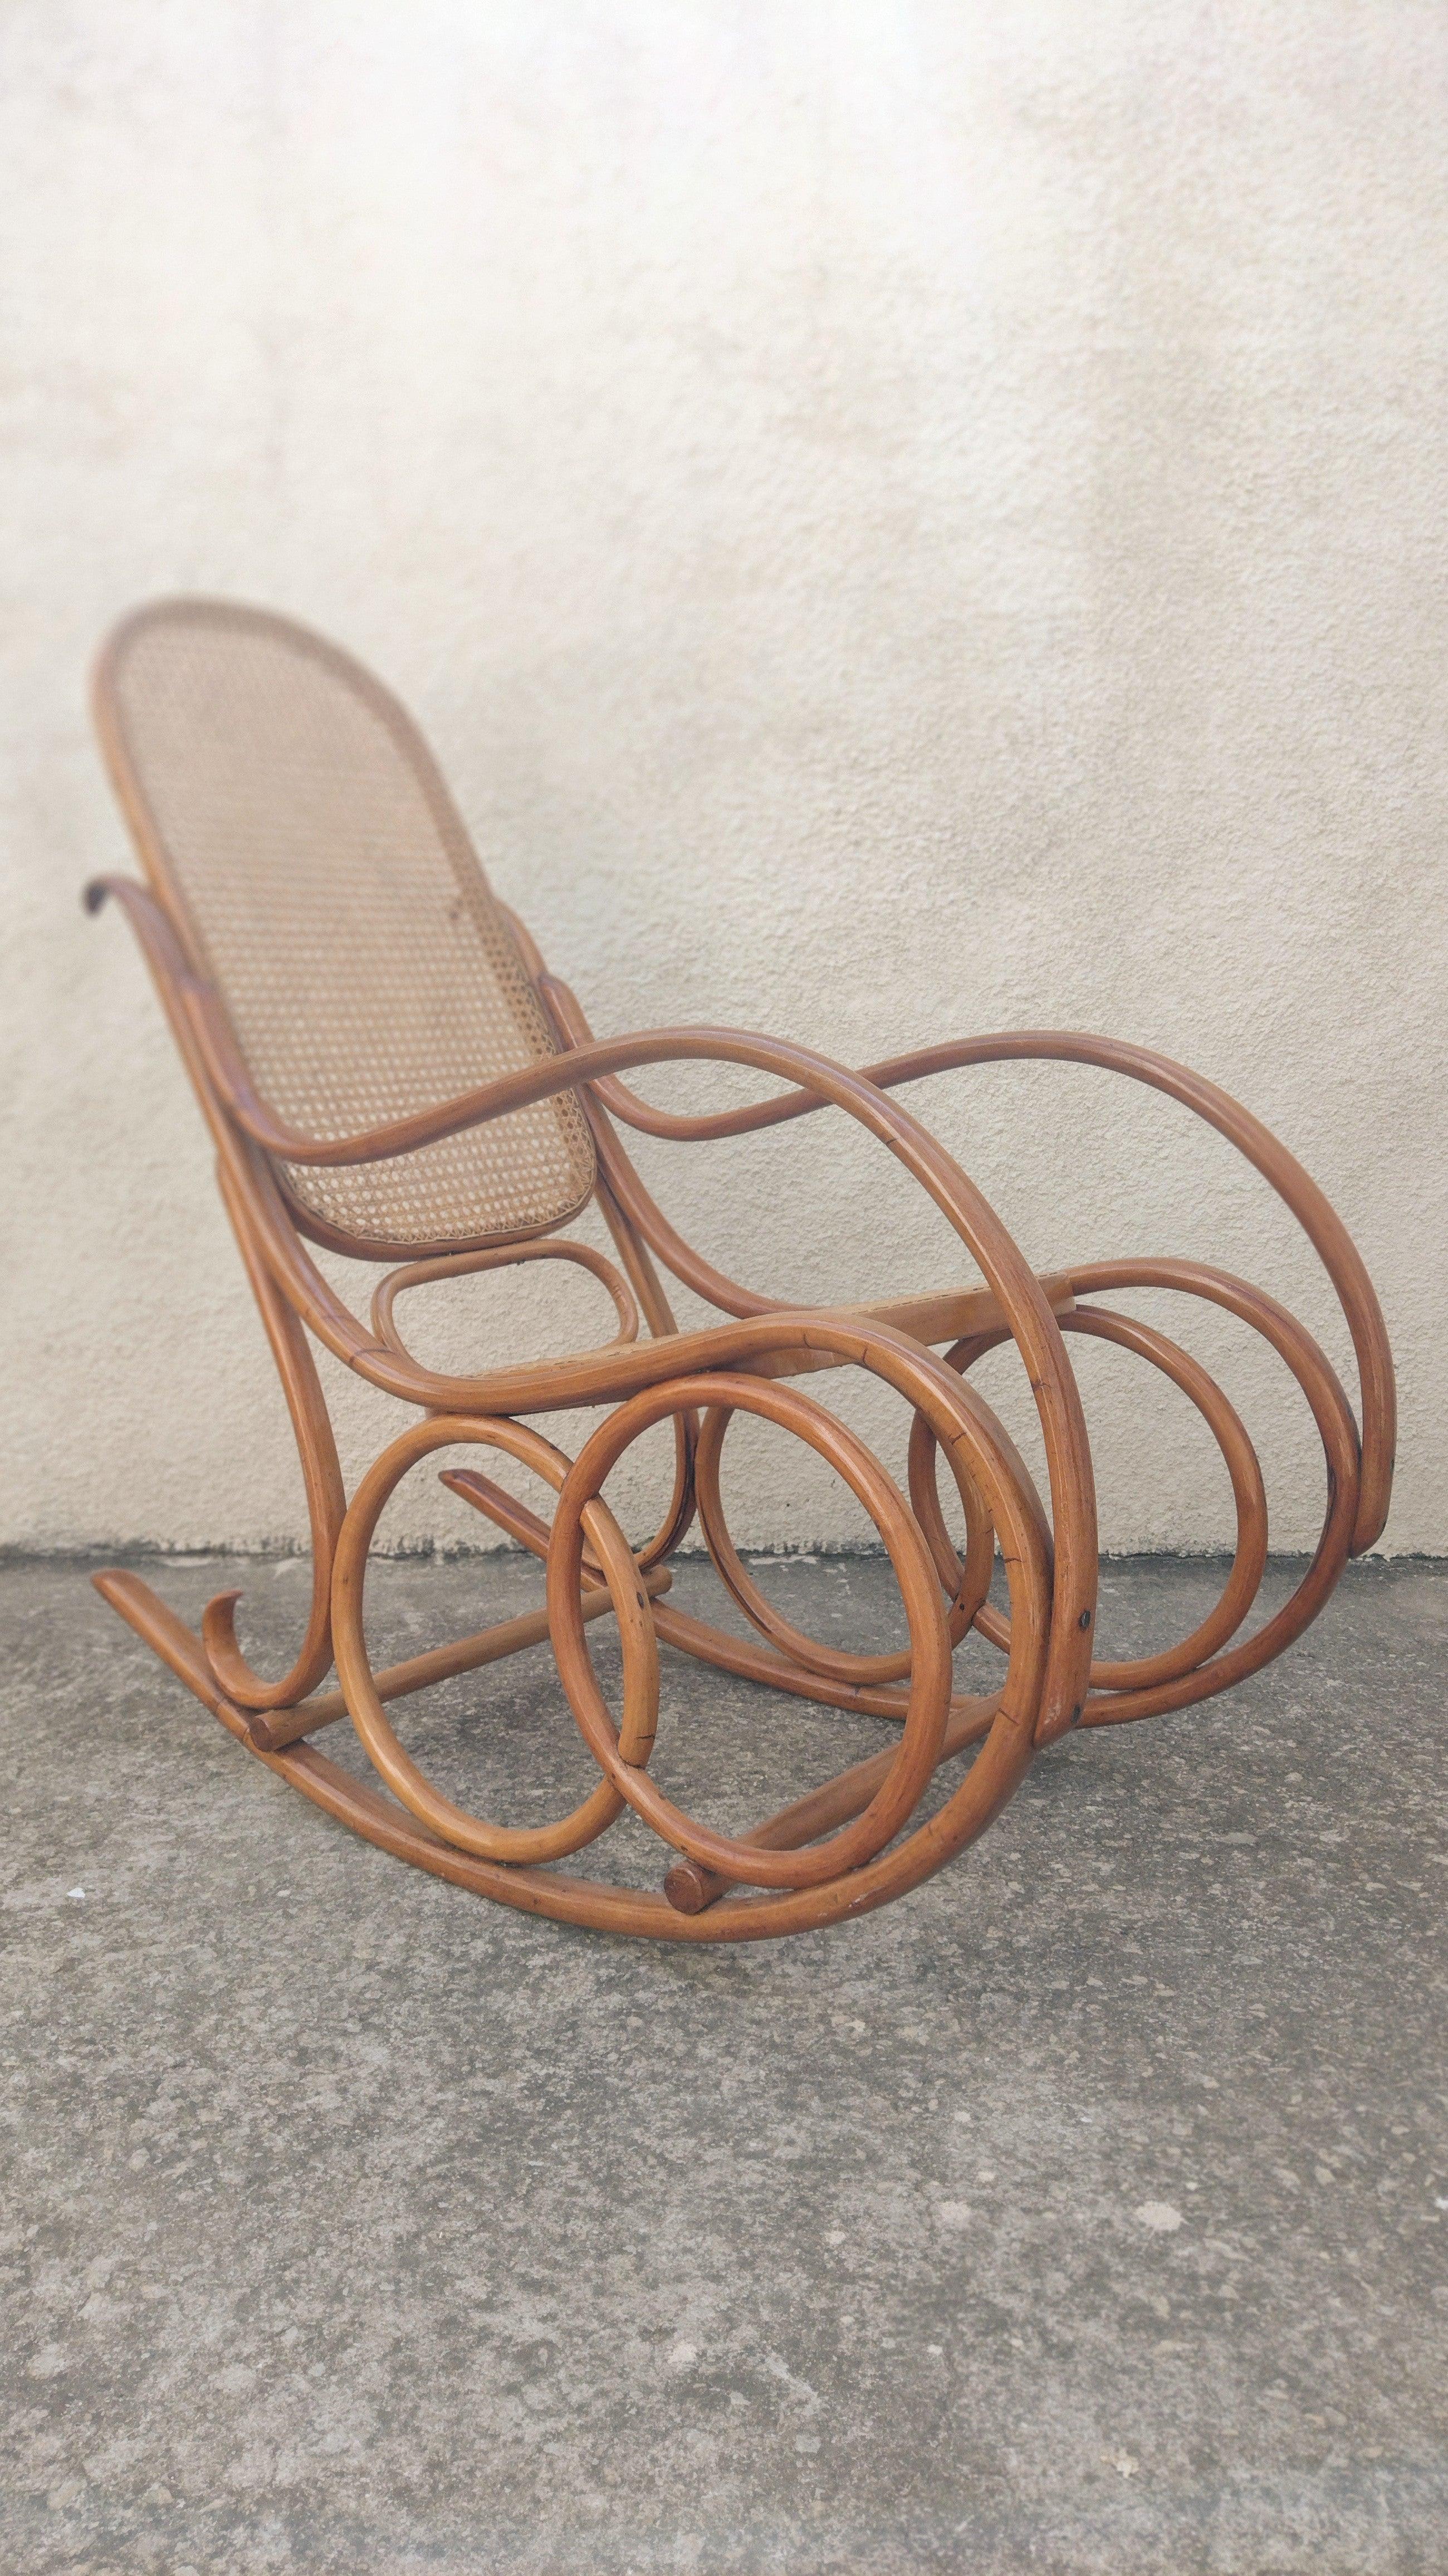 Brazilian Rocking Chair in Curved Wood and Indian Straw, 1960s For Sale 6